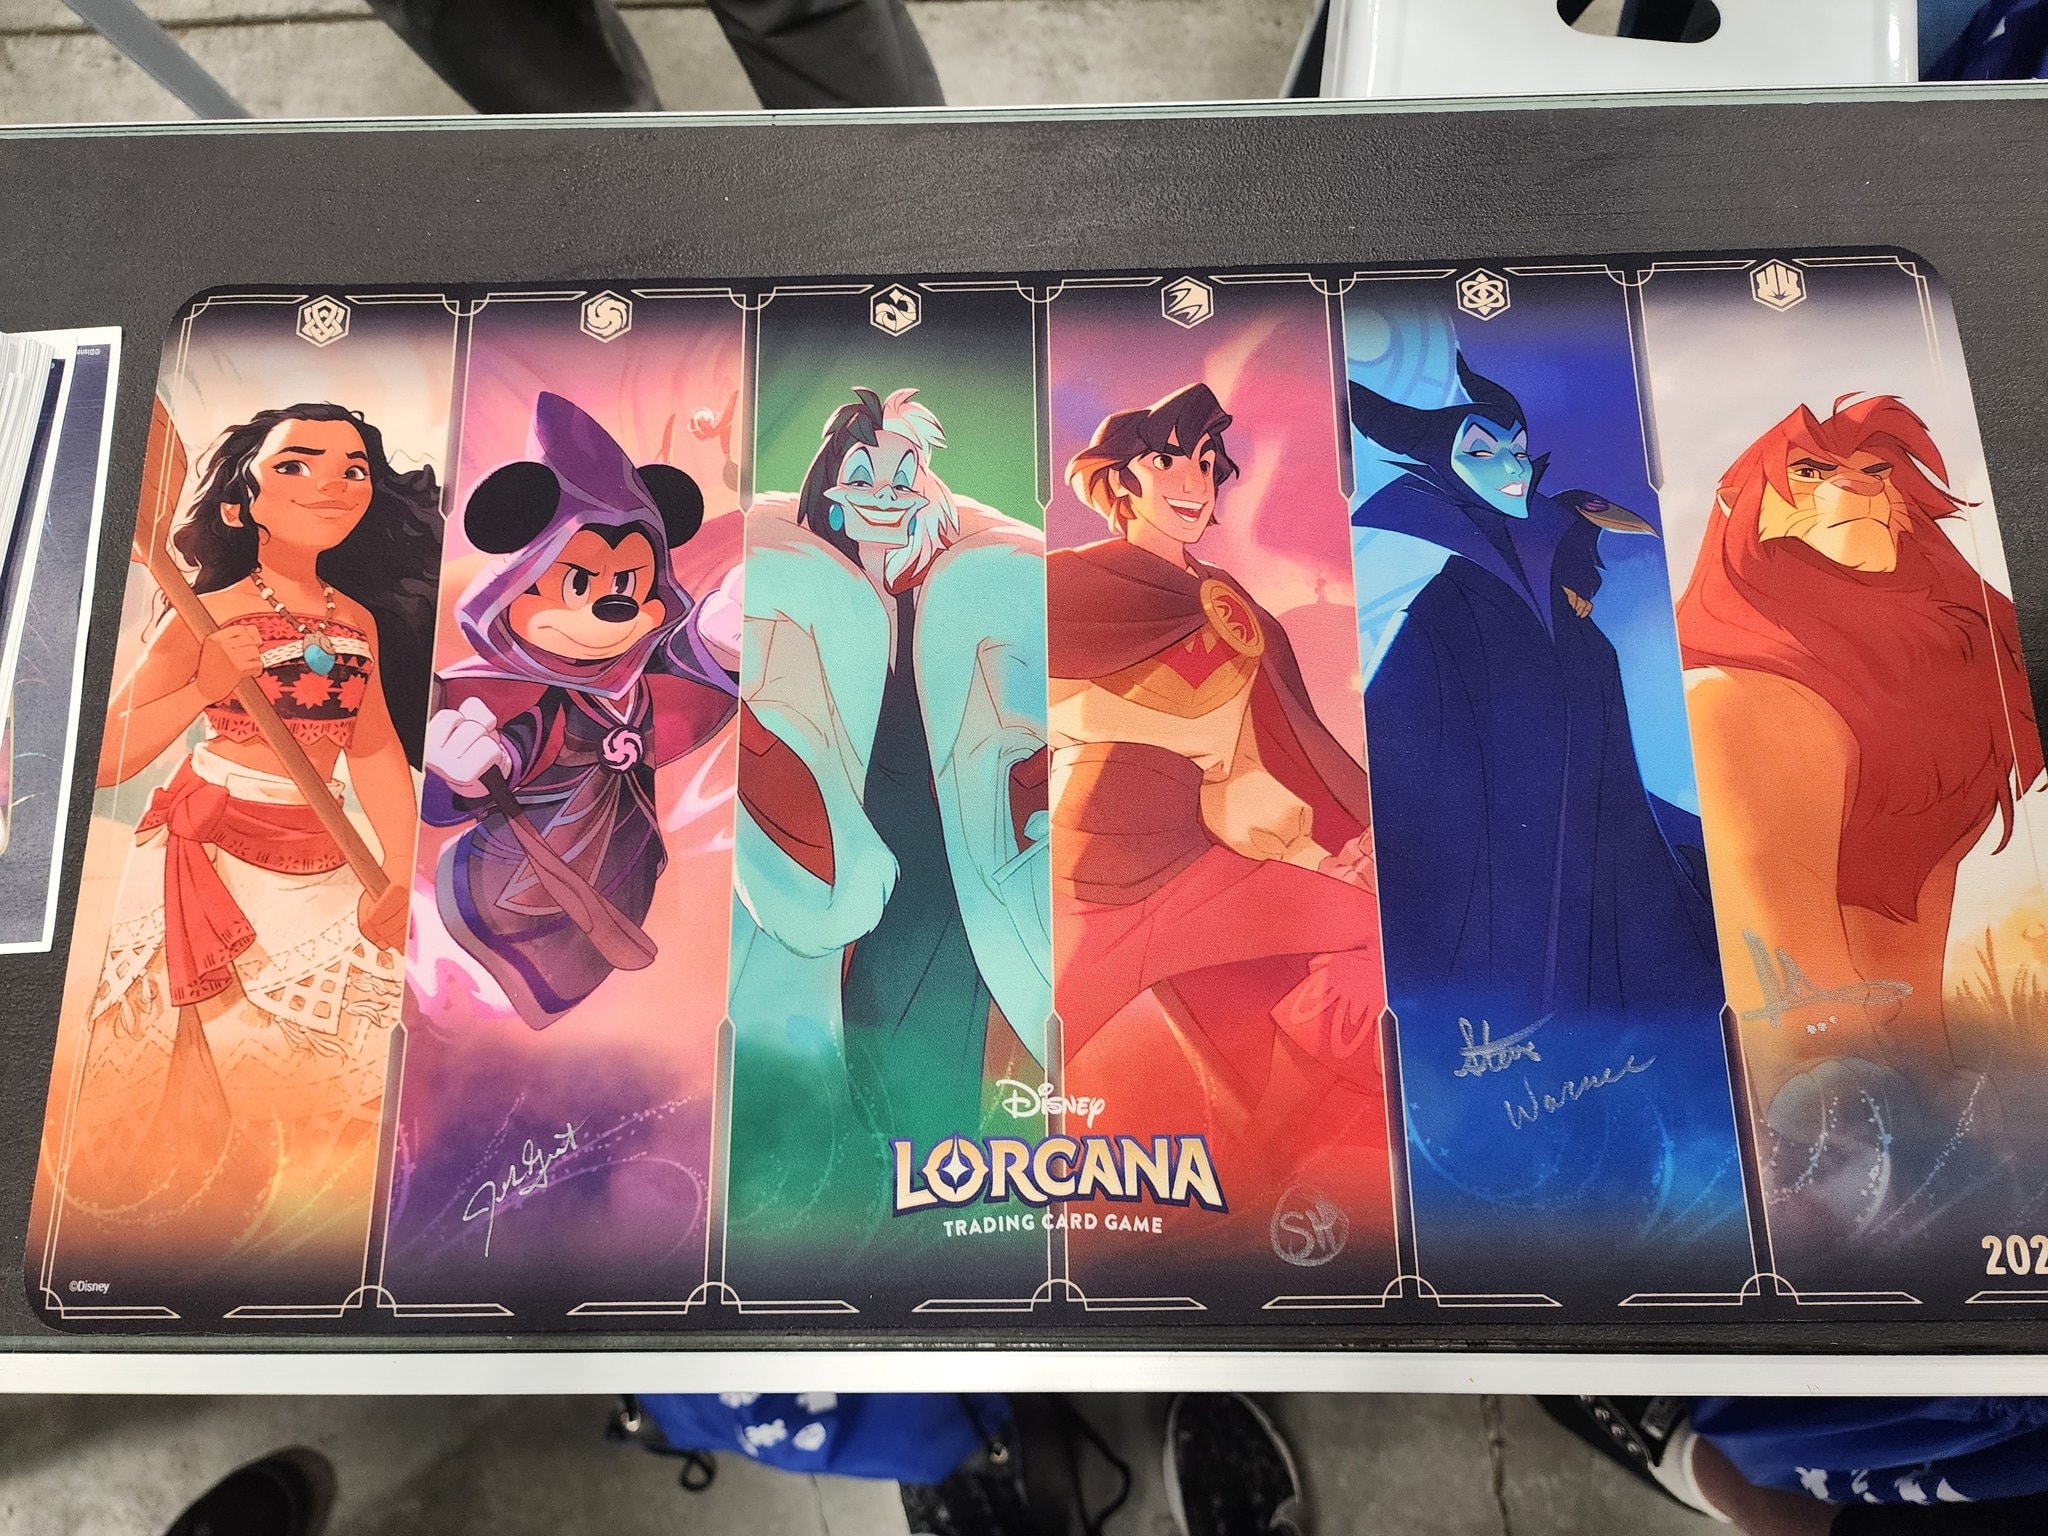 Admission: Disney Lorcana Learn to Play - Downers Grove (8/19, 2:30pm) -  Fair Game